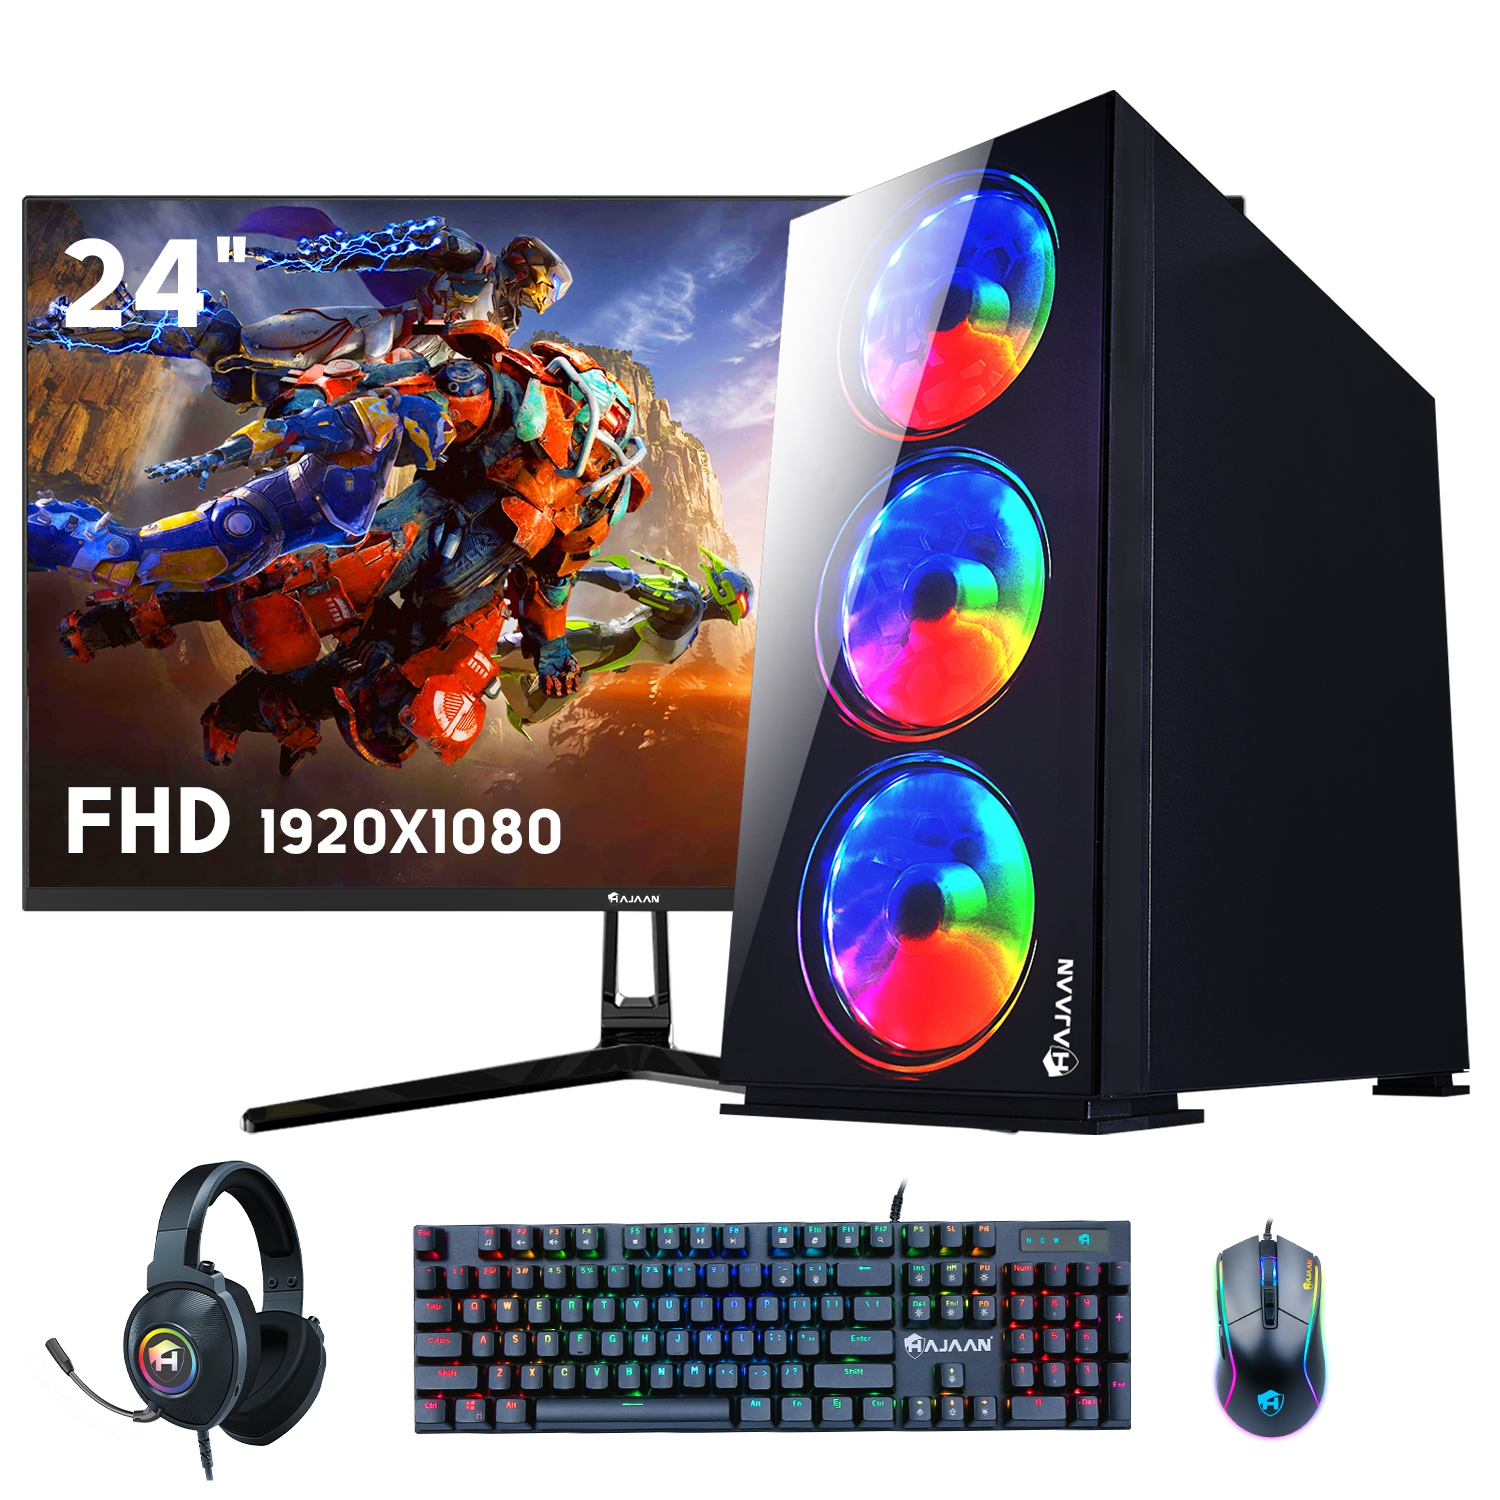 Refurbished (Excellent) Prebuilt Gaming PC Desktop Tower, Intel Core i7 3.6GHz, GeForce RTX 2060 6G, 32GB RAM 1TB SSD, New 24″ Gaming Monitor, Gaming Headset, AC WiFi, Win 10 Pro